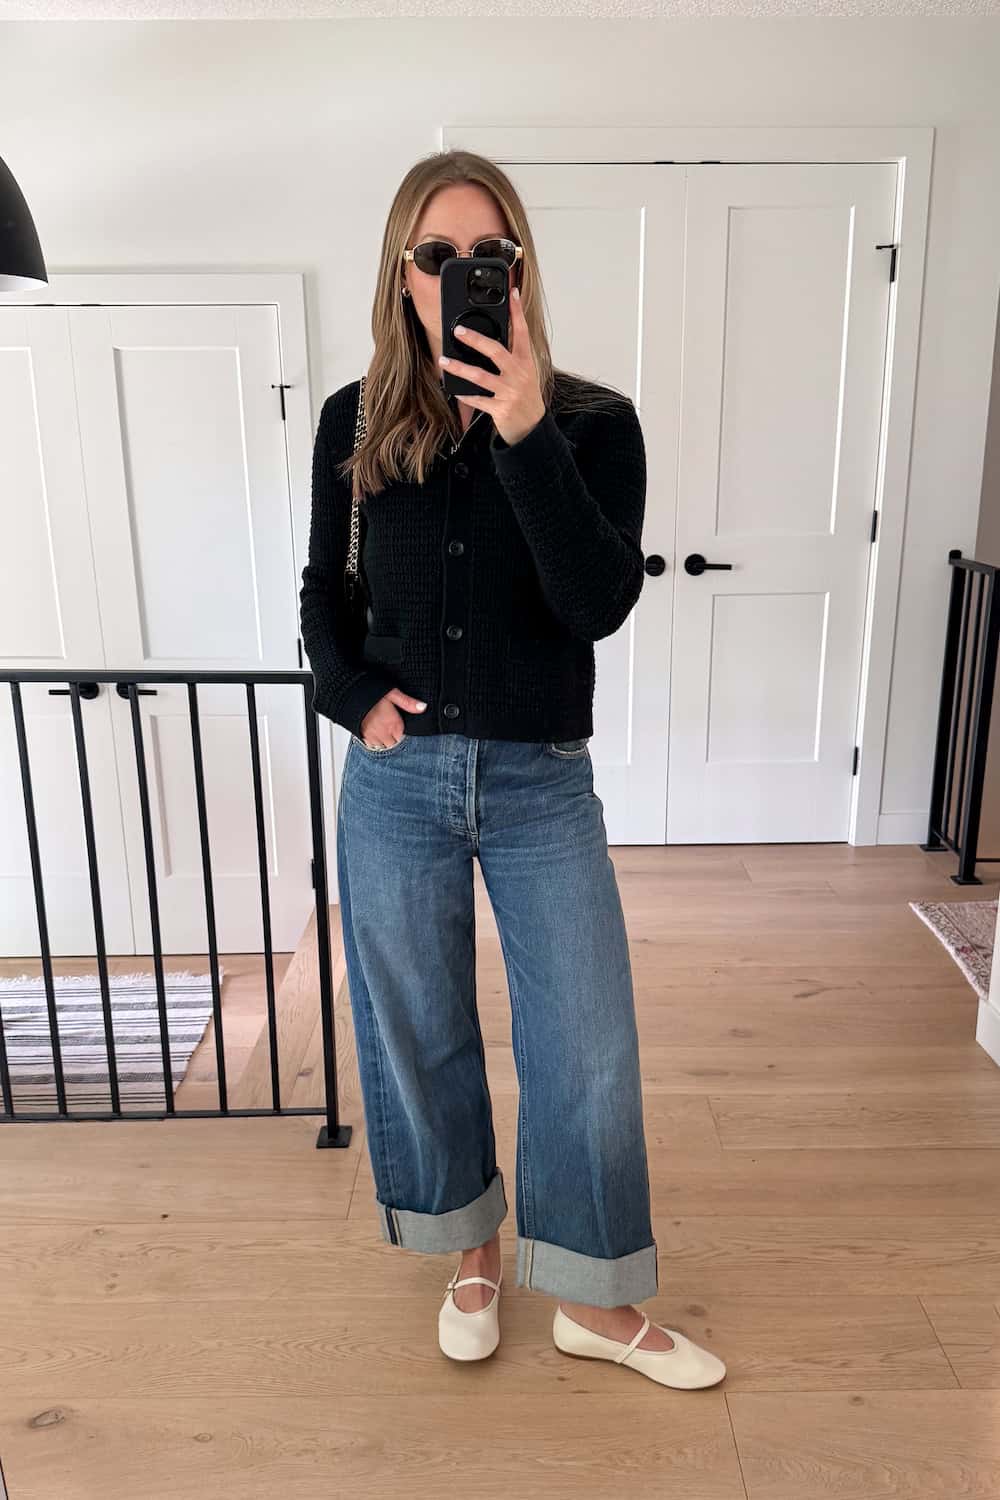 Christal wearing wide-leg jeans with cream mary jane flats and a black cardigan.